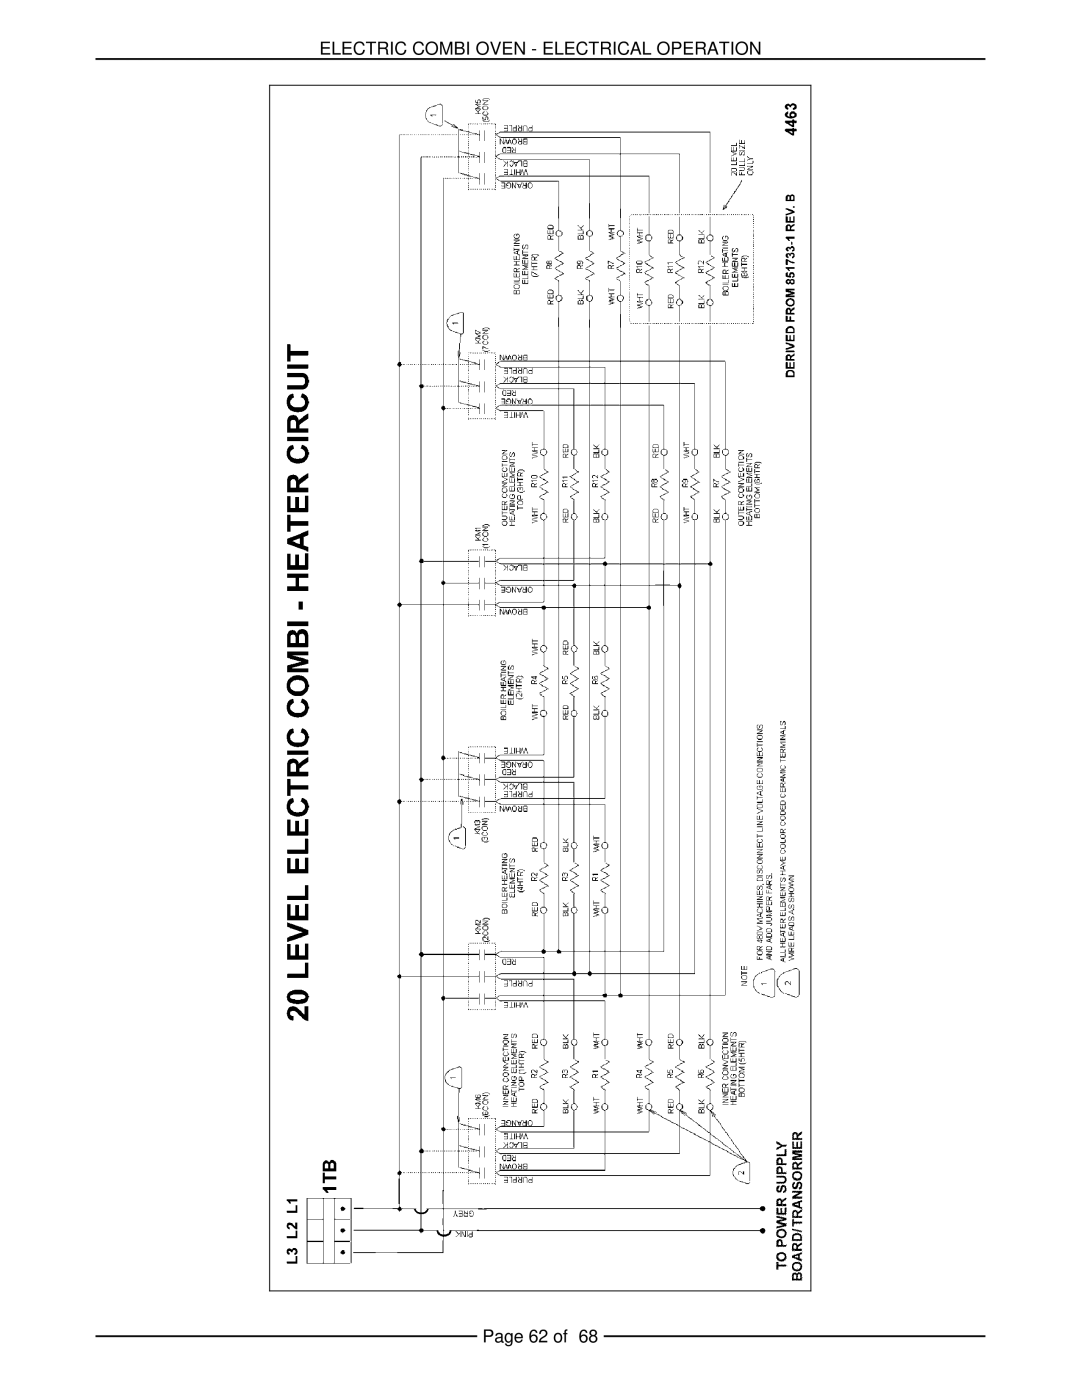 Vulcan-Hart VCE6H 126177, VCE20H 126172, VCE10H 126178, VCE20F 126173 Electric Combi Oven - Electrical Operation, Page 62 of 